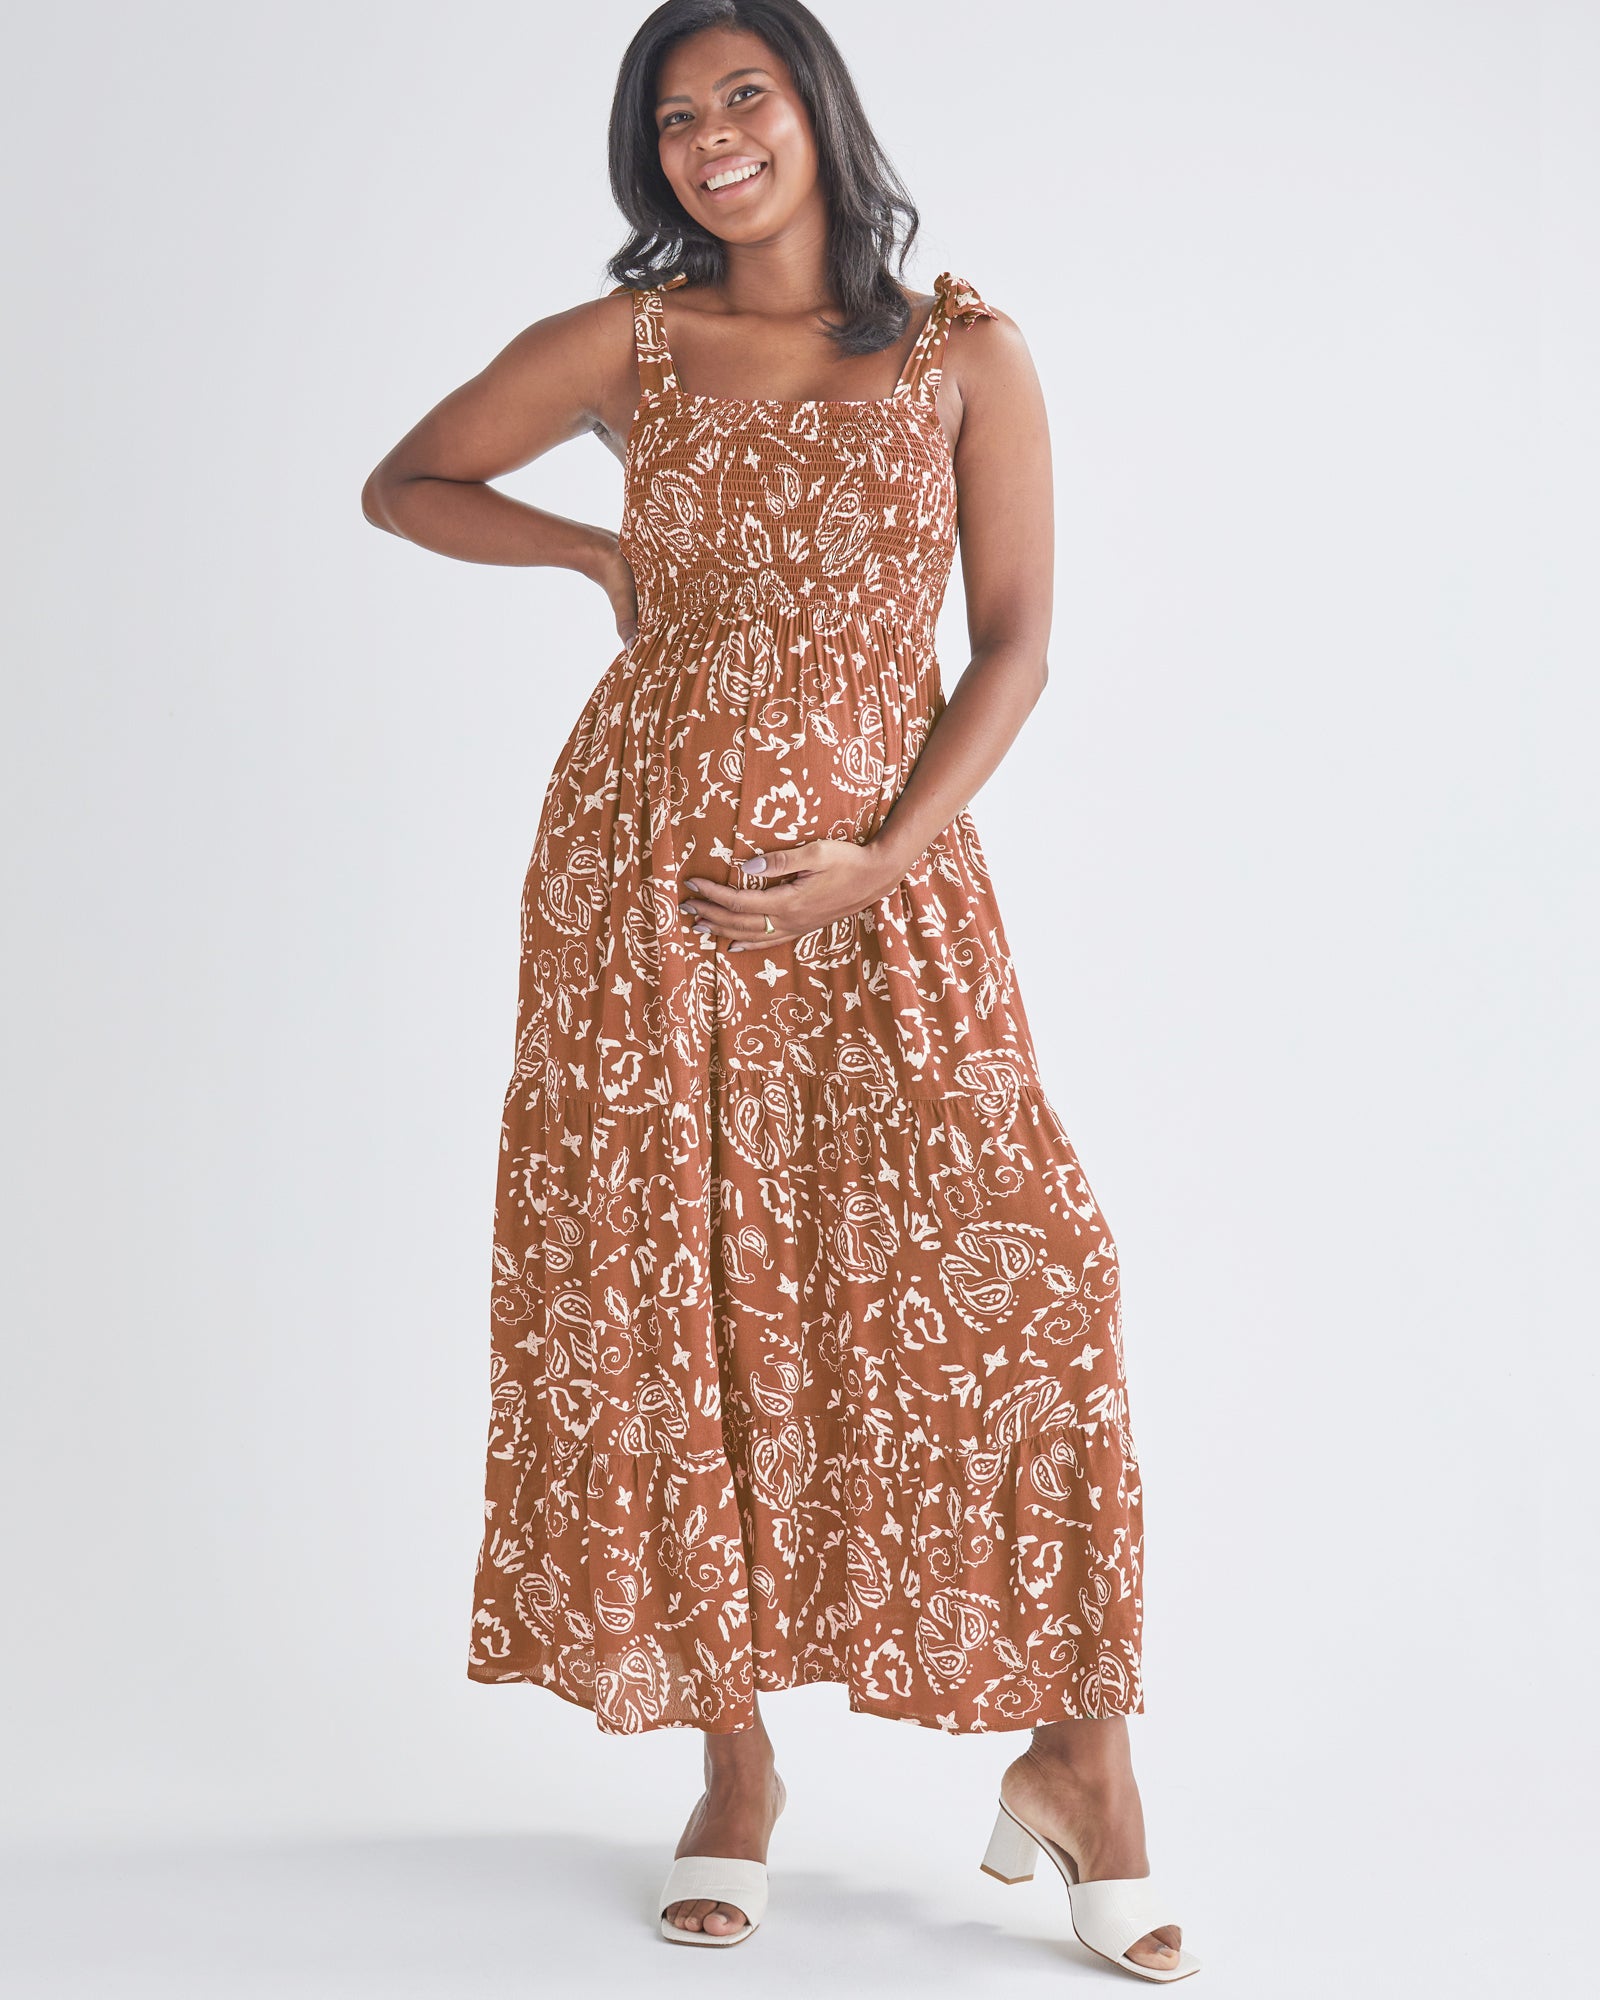 A pregnant Woman Wearing Maternity Maxi Dress in Brown Paisley Print from Angel Maternity